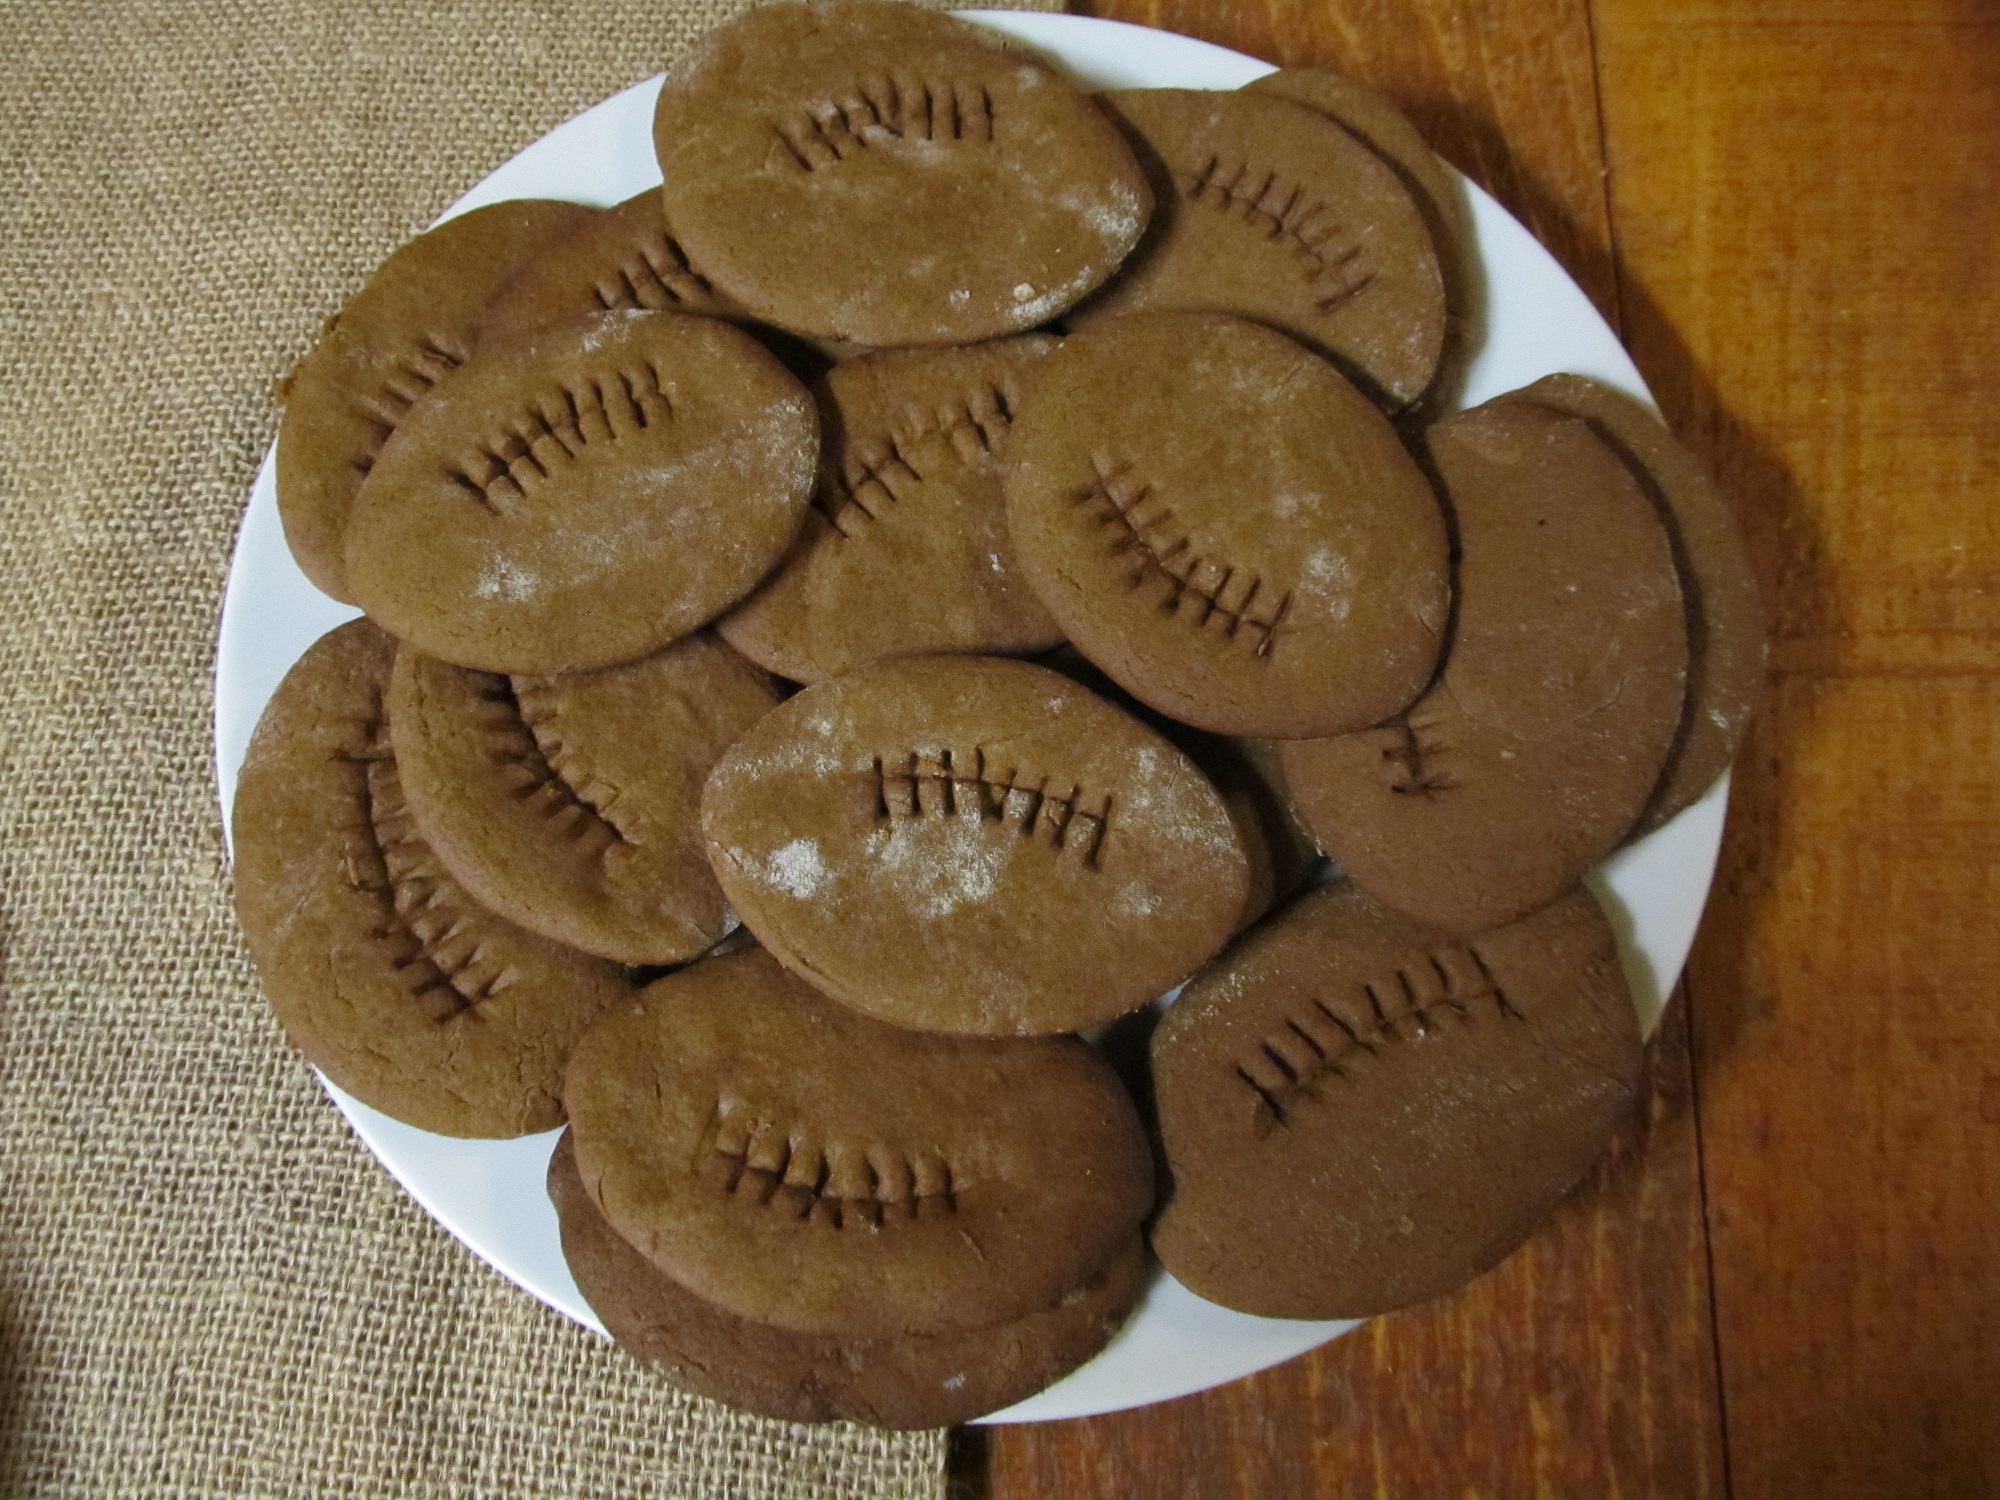 <!-- AddThis Share Buttons above via filter on get_the_excerpt -->
<div class="at-above-post-cat-page" data-url="http://www.not2crafty.com/2014/01/football-cookies-super-bowl-party/" data-title="Football cookies for Super Bowl party"></div>

These football shaped ginger cookies are so good and spicy. I found the recipe years ago in an old cookbook but have changed it over the years until the final [...]<!-- AddThis Share Buttons below via filter on get_the_excerpt -->
<div class="at-below-post-cat-page" data-url="http://www.not2crafty.com/2014/01/football-cookies-super-bowl-party/" data-title="Football cookies for Super Bowl party"></div><!-- AddThis Share Buttons generic via filter on get_the_excerpt -->
<!-- AddThis Related Posts generic via filter on get_the_excerpt -->
